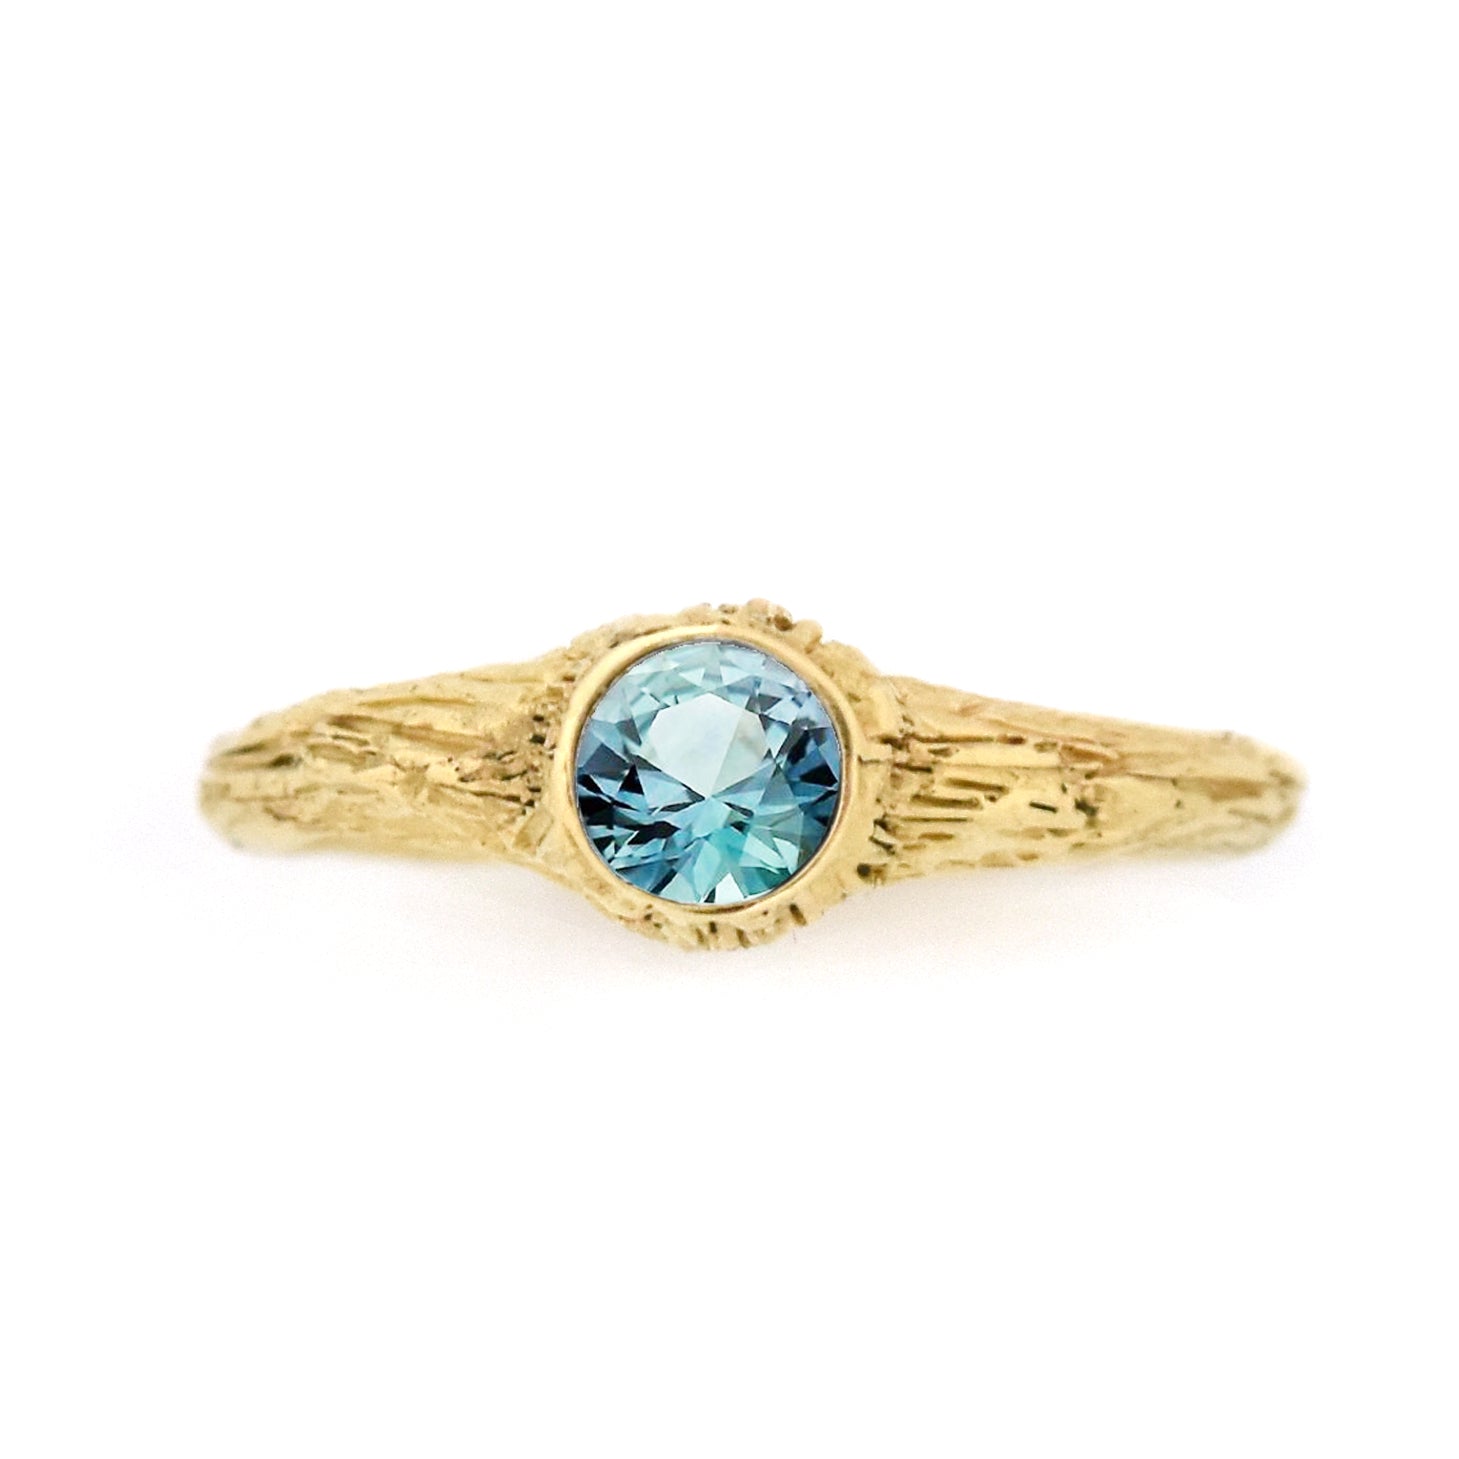 Gold Heartwood Diamond Ring - your choice of 5mm stone & gold - Wedding Ring Recycled Diamond / 18K Palladium White Gold Conflict Free Diamond / 18K Palladium White Gold 6323 - handmade by Beth Millner Jewelry